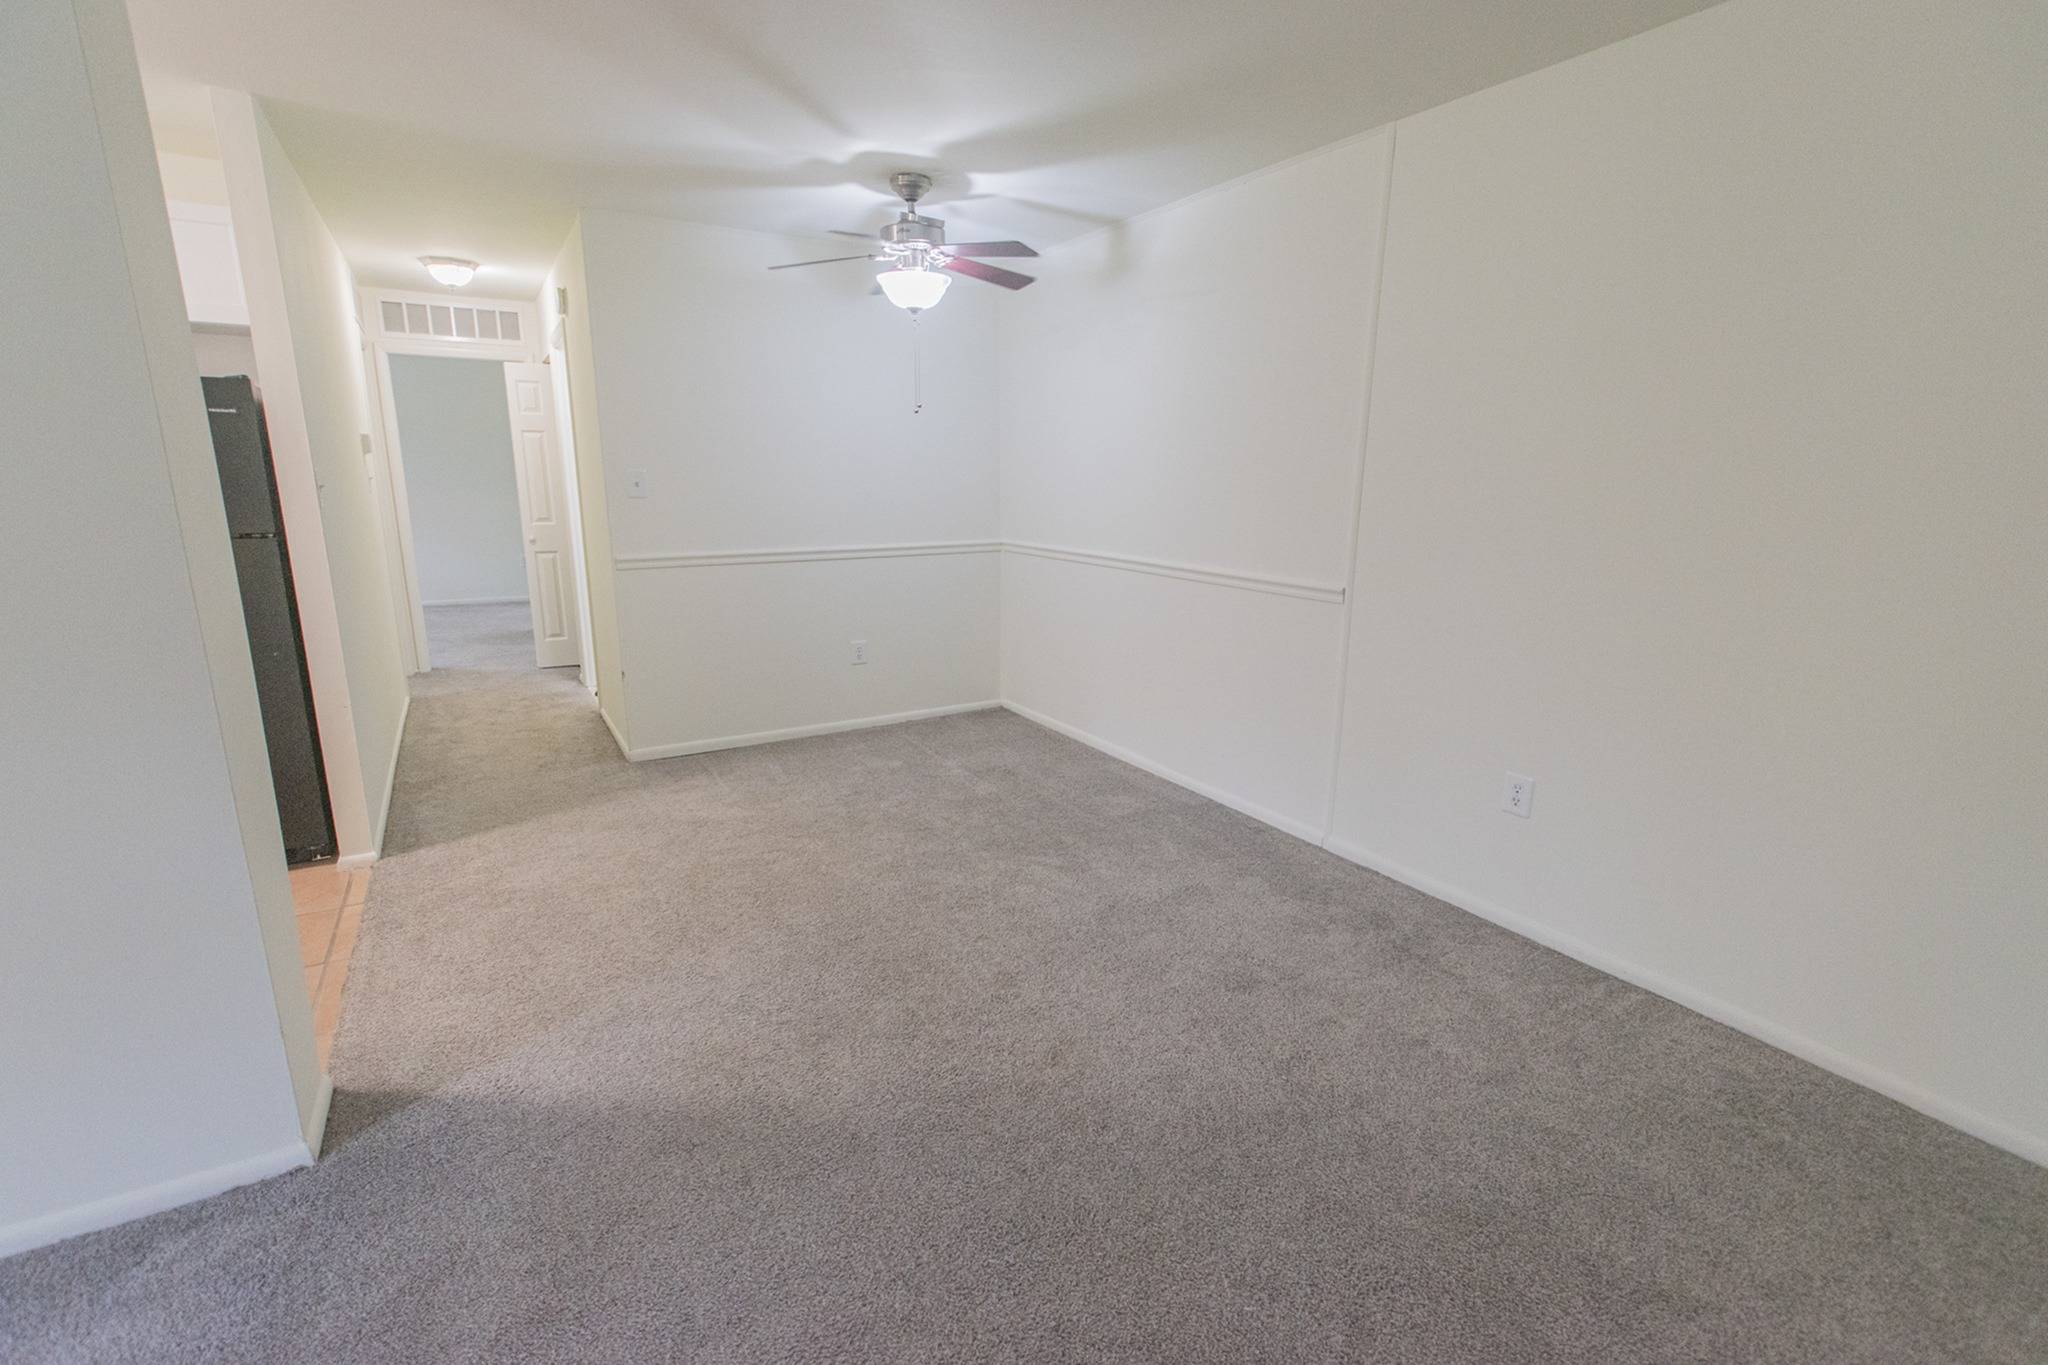 Carpeted area with a ceiling fan.